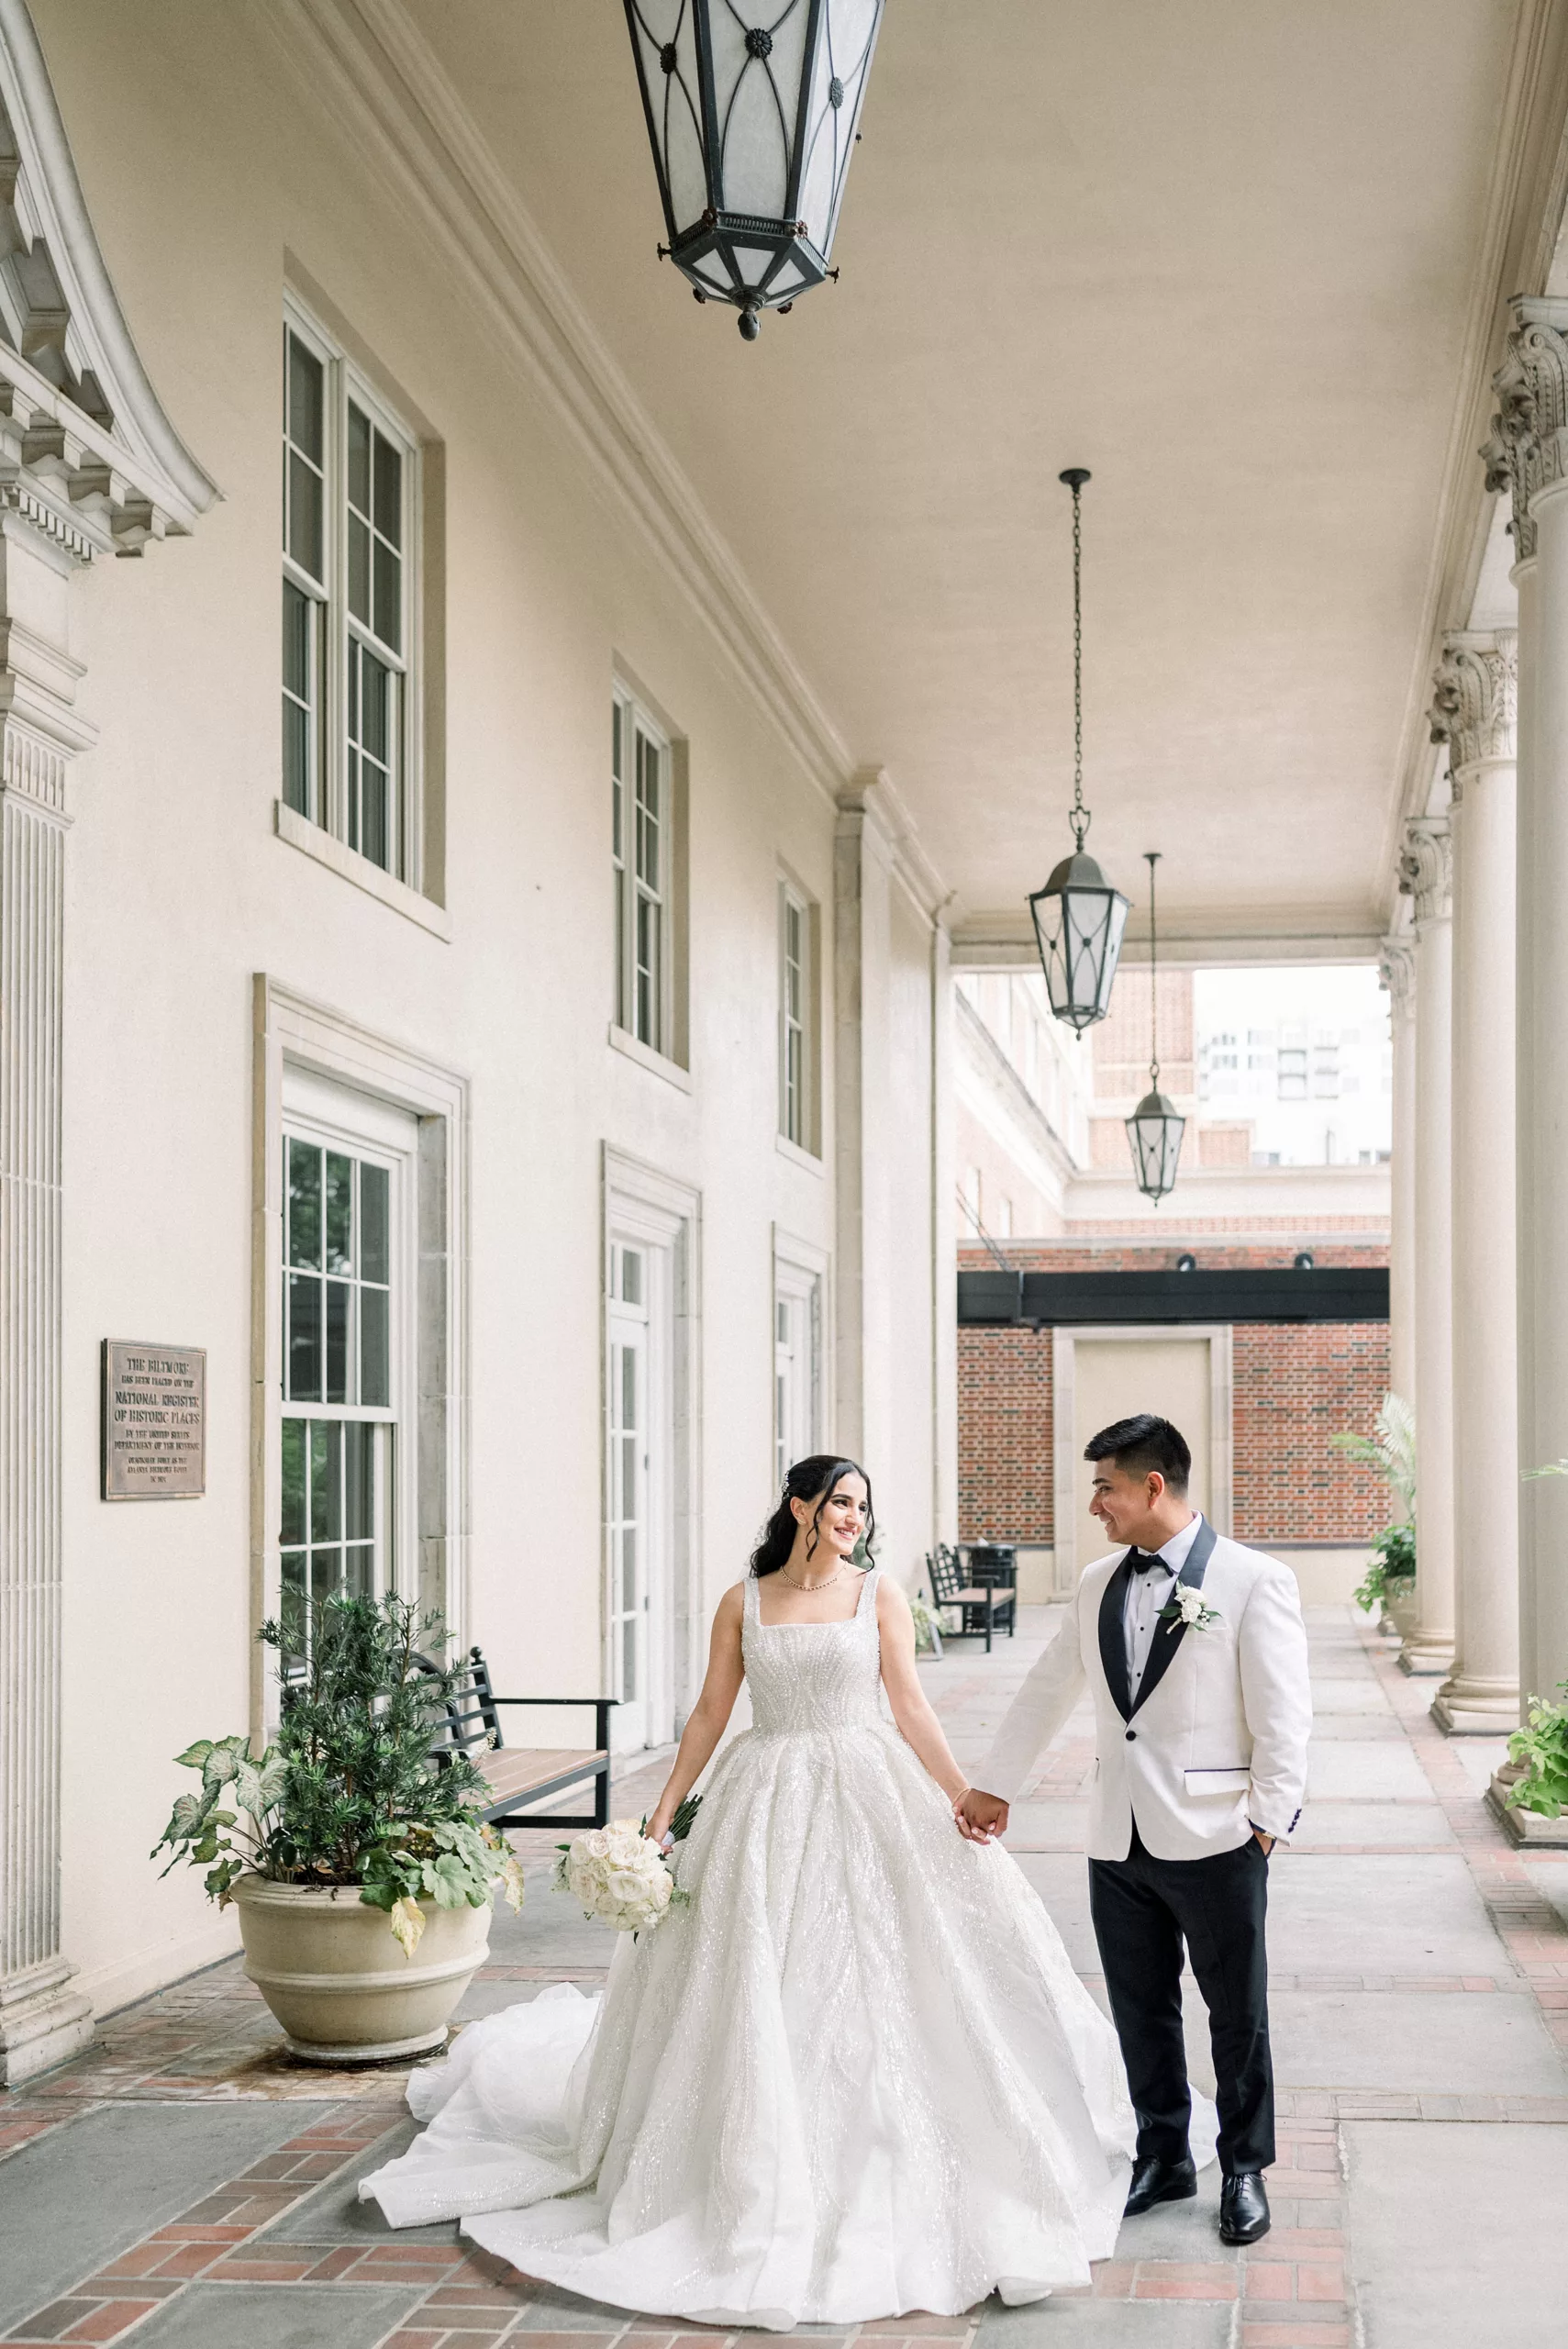 Newlyweds walk down the front porch holding hands at the Biltmore Ballrooms Wedding venue